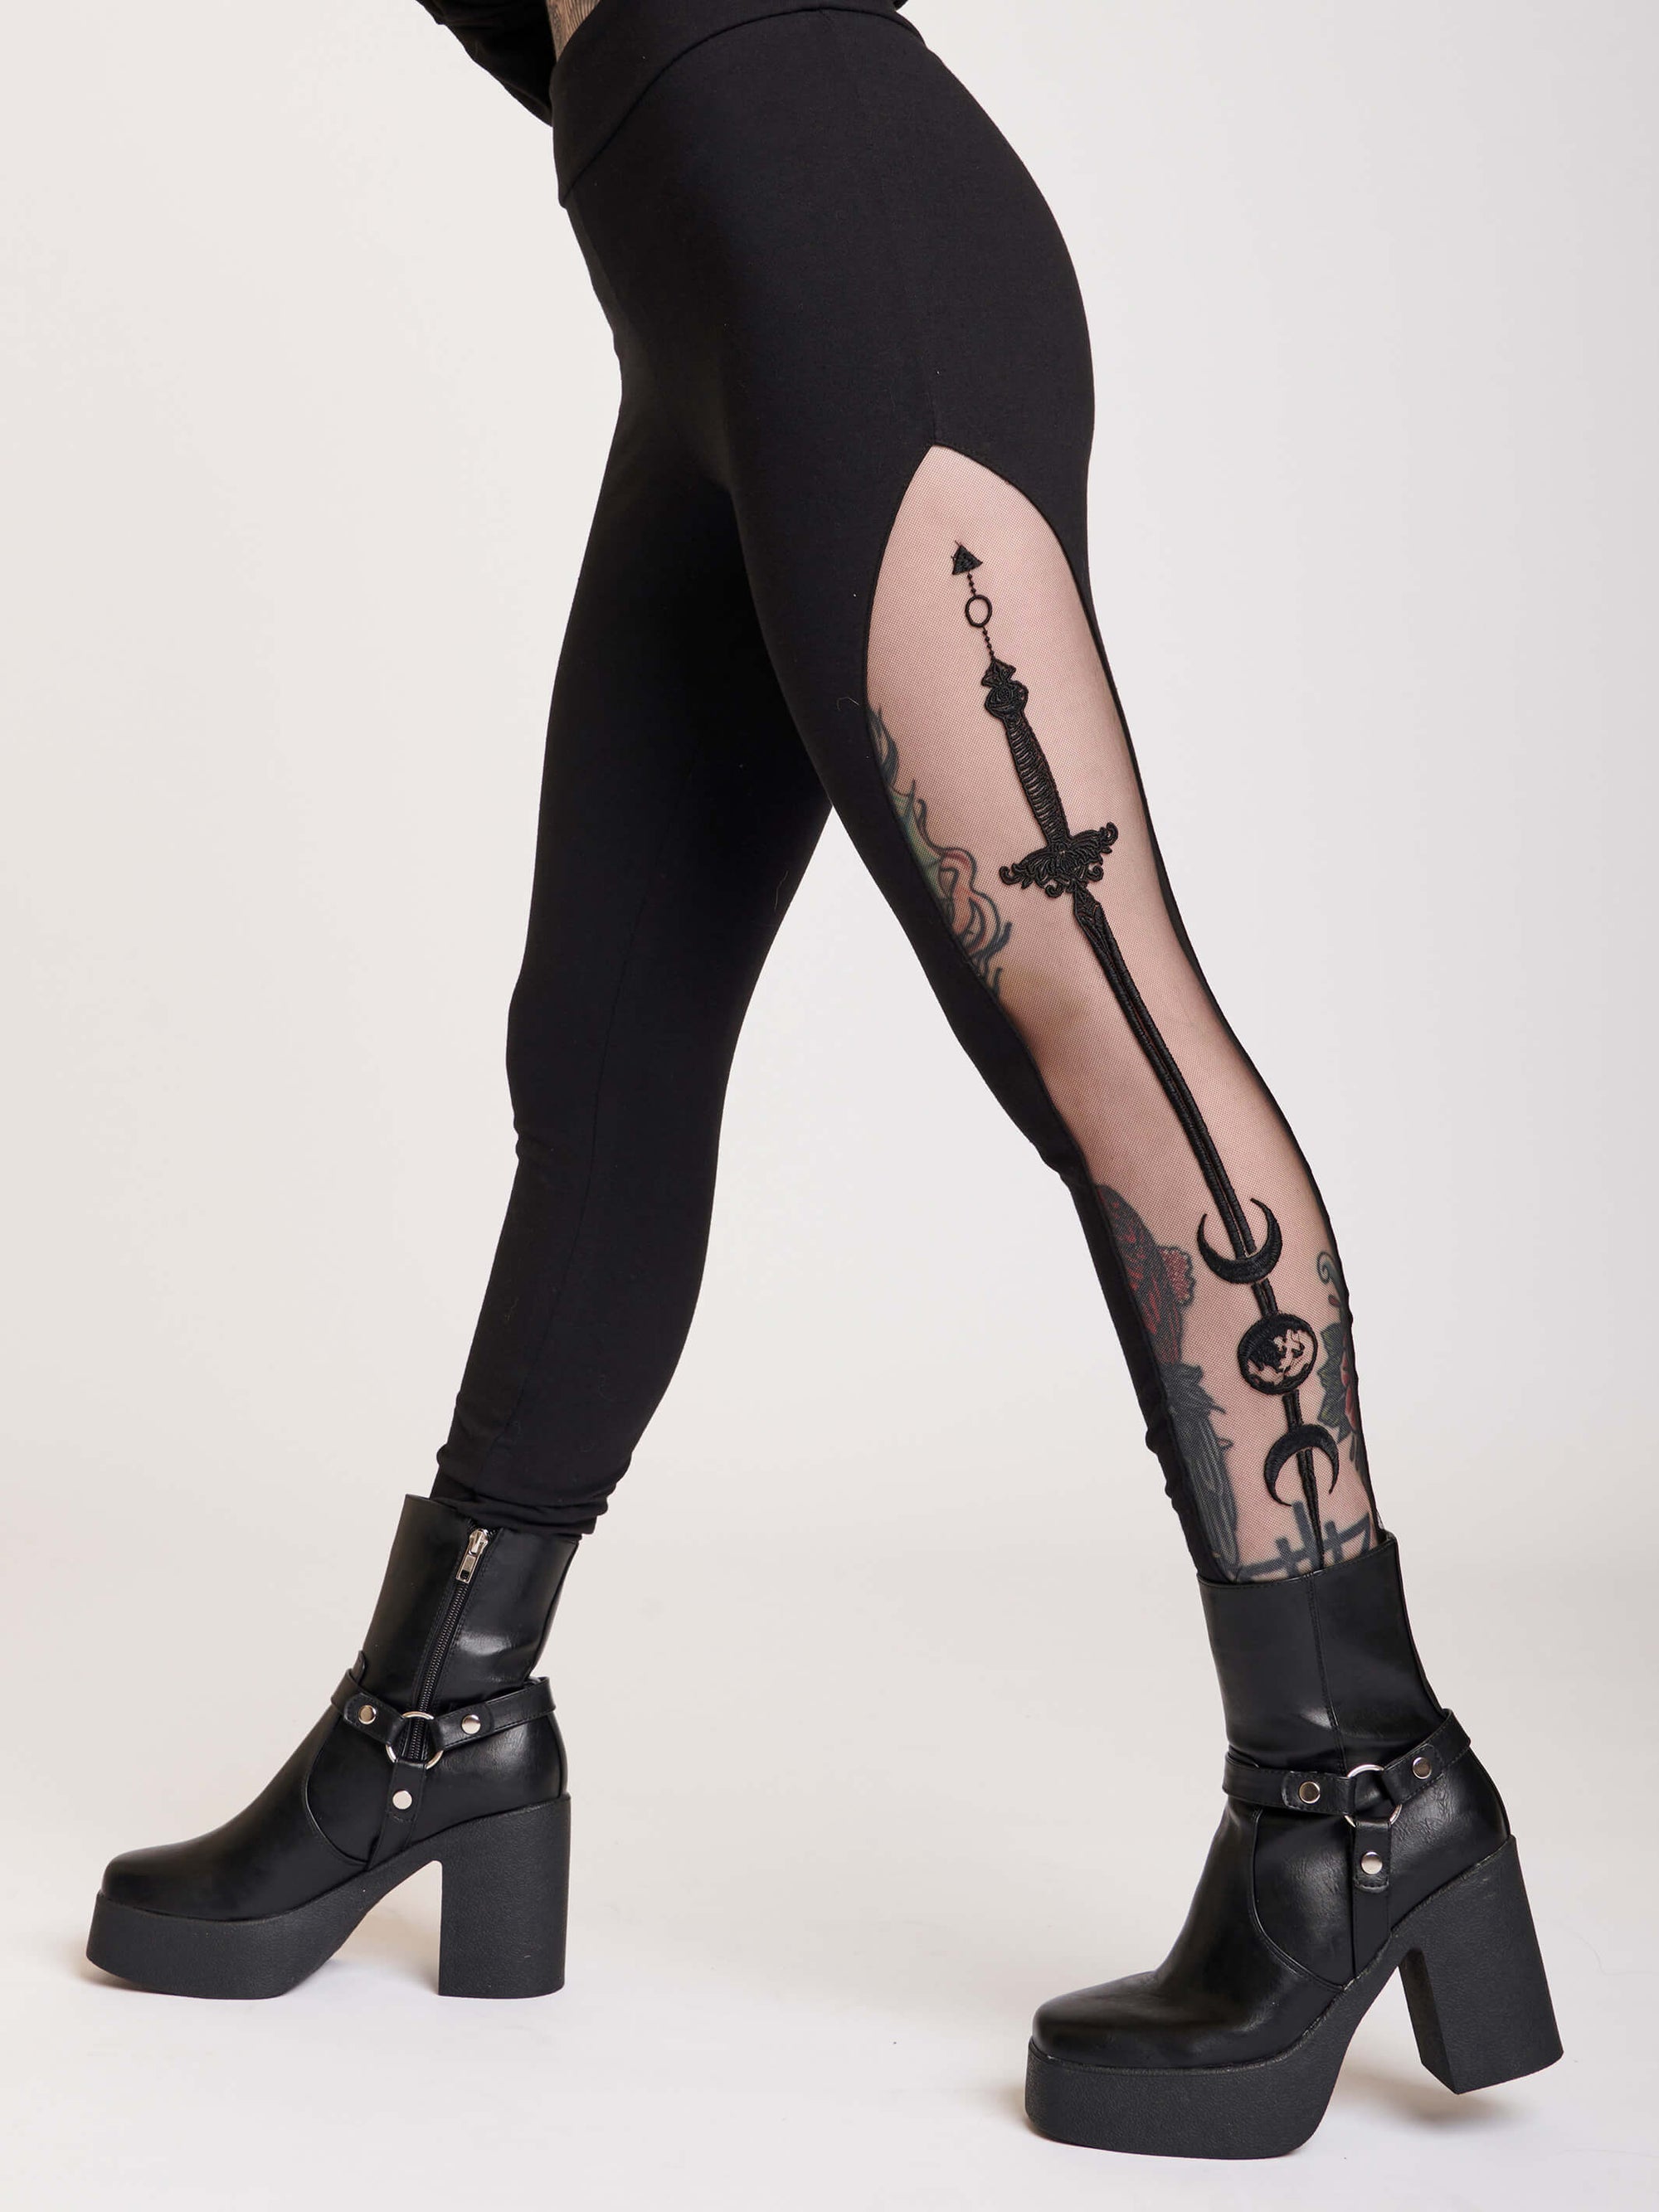 Black legging with side mesh embroidered panel